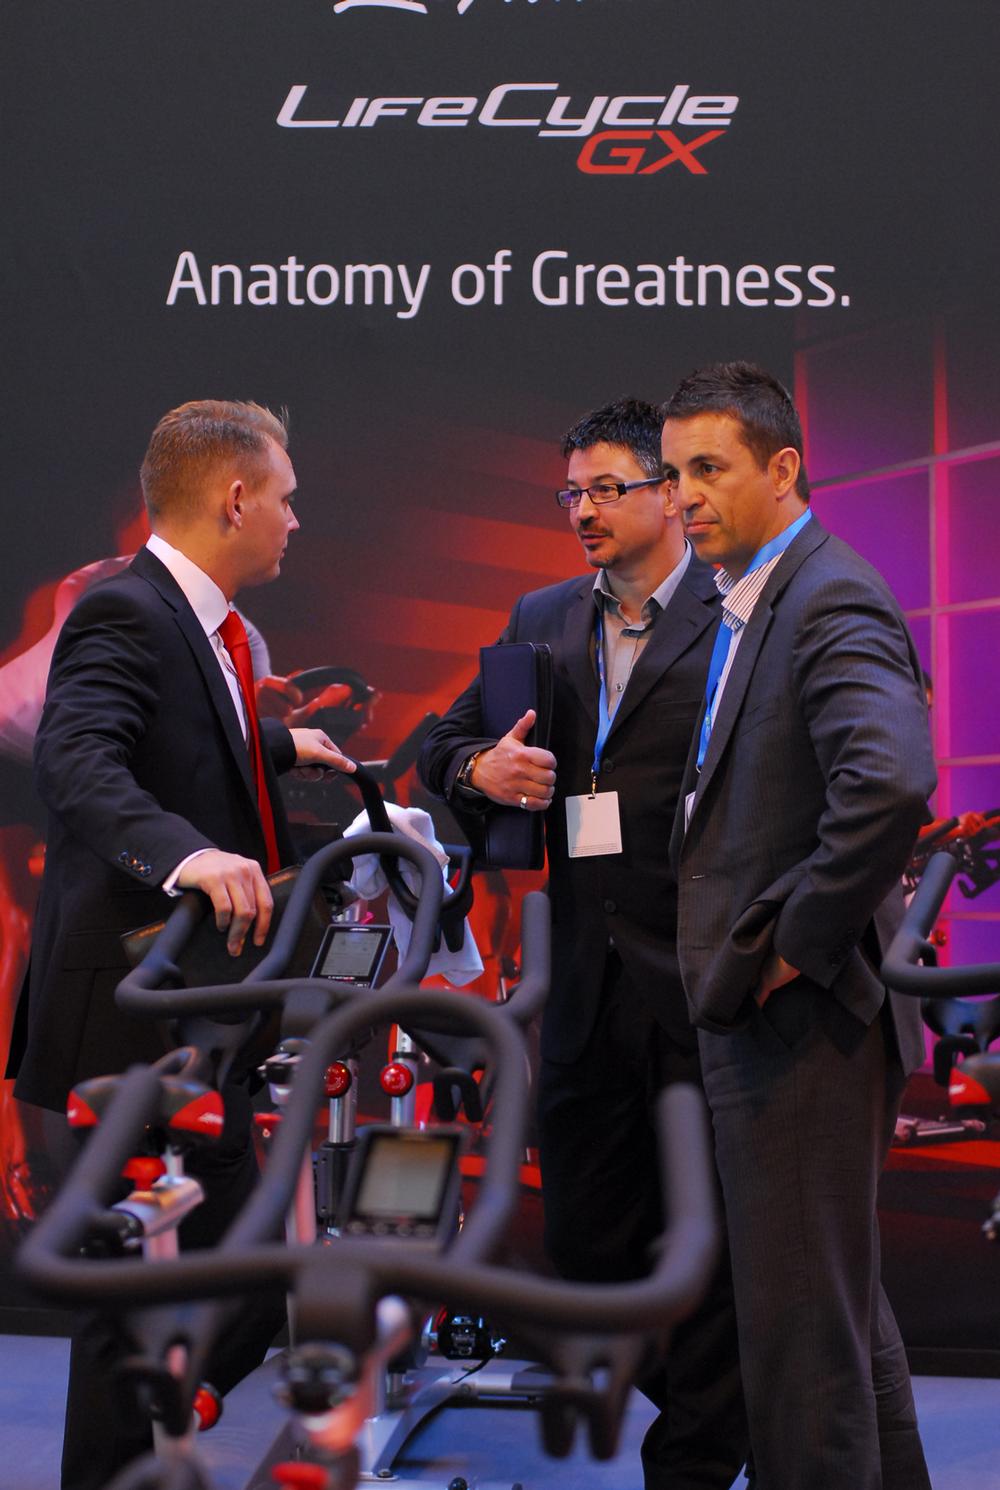 Fitness professionals will be able to try out the latest product innovations